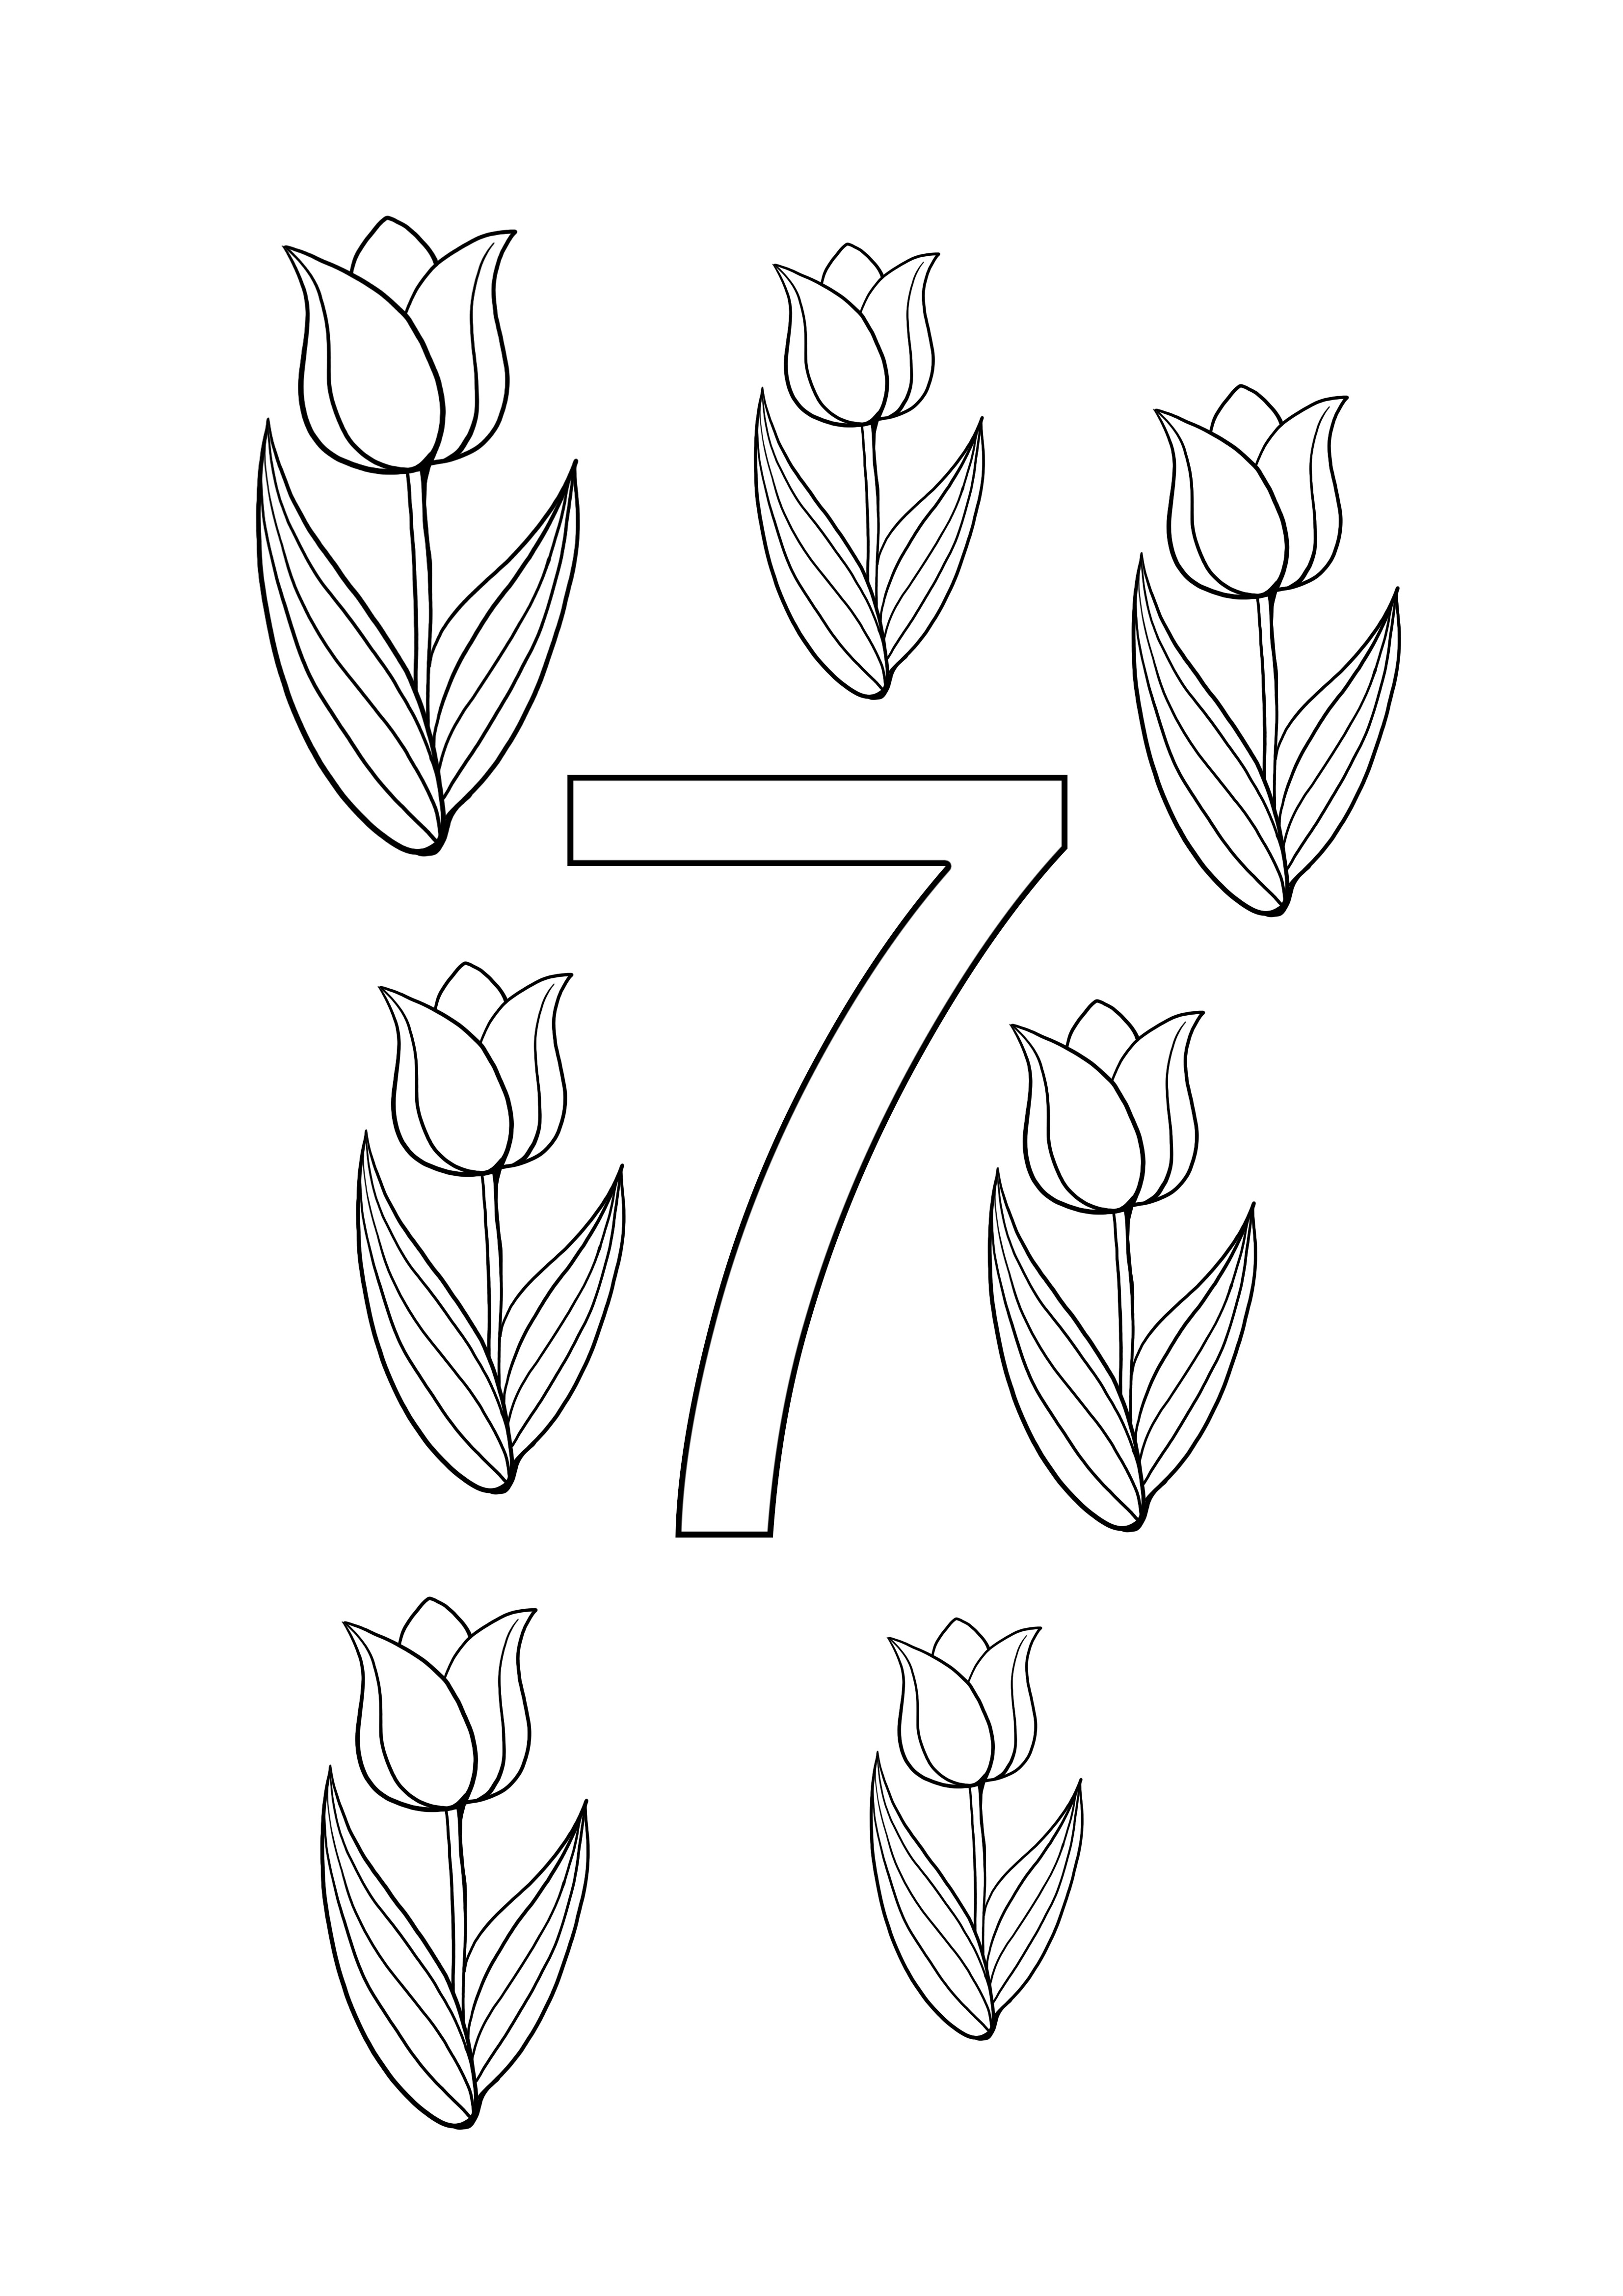 seven tulips number coloring page, free to print and download